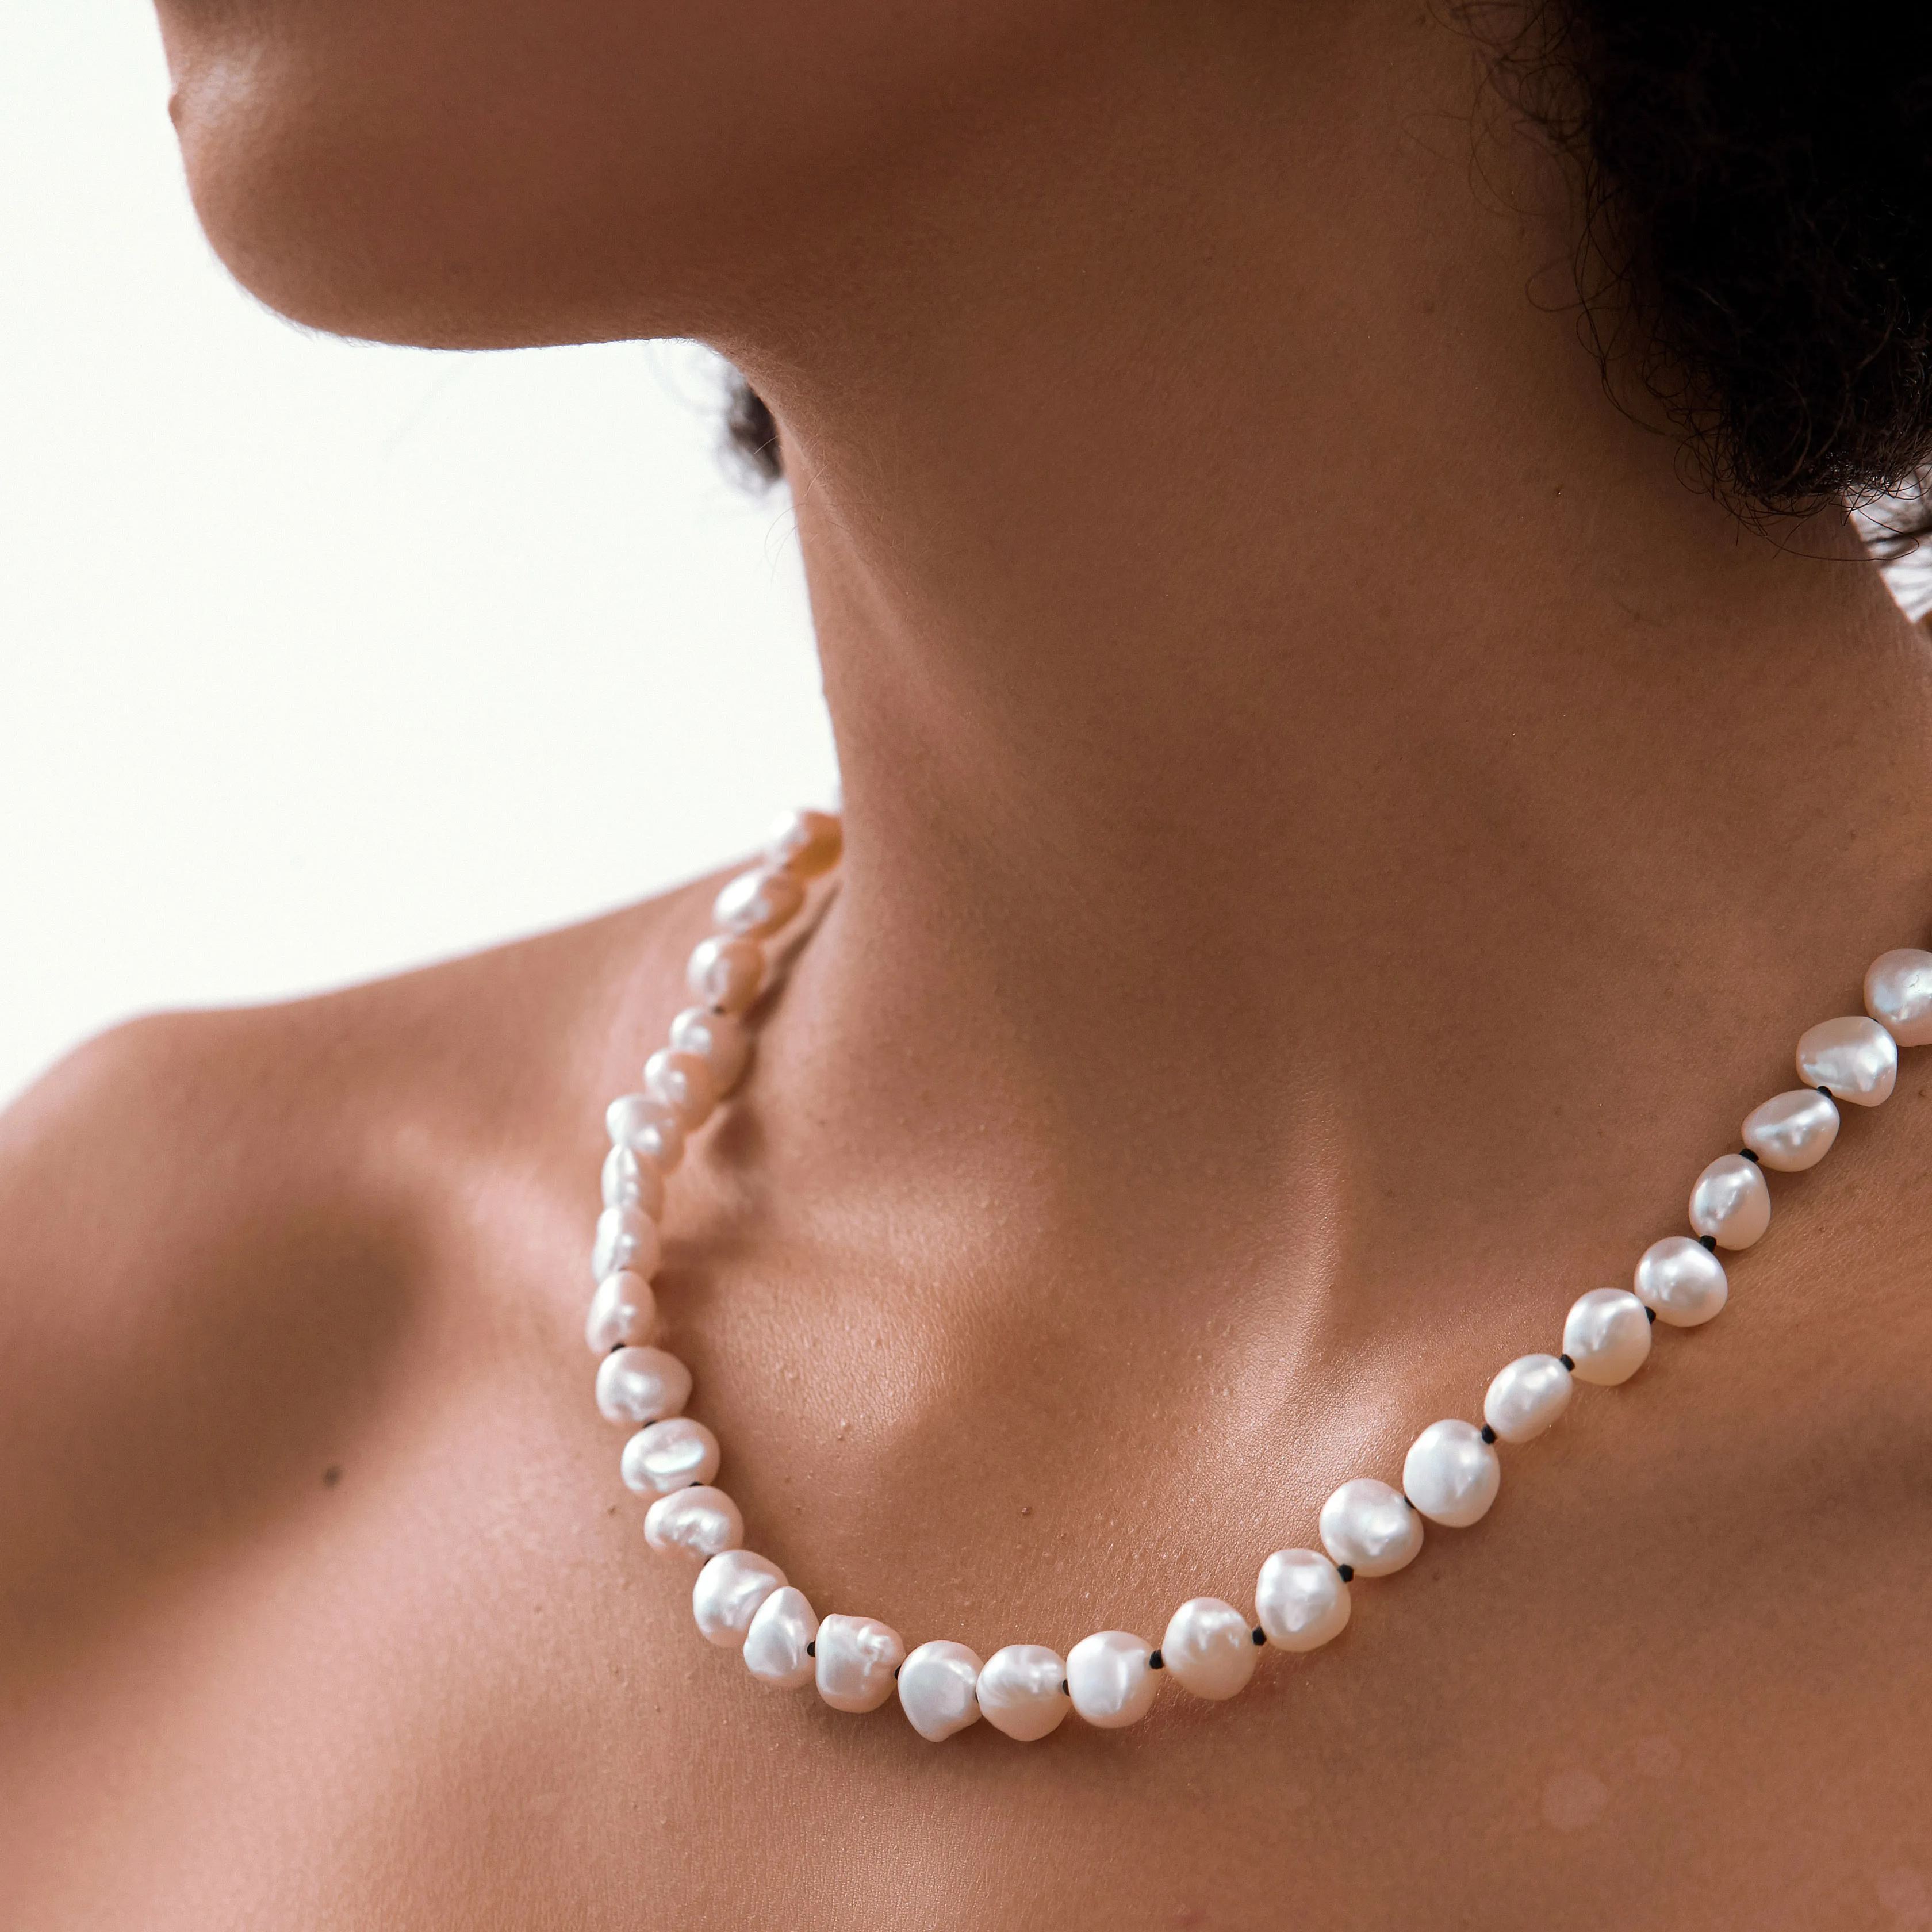 Knotted Baroque Pearl Necklace